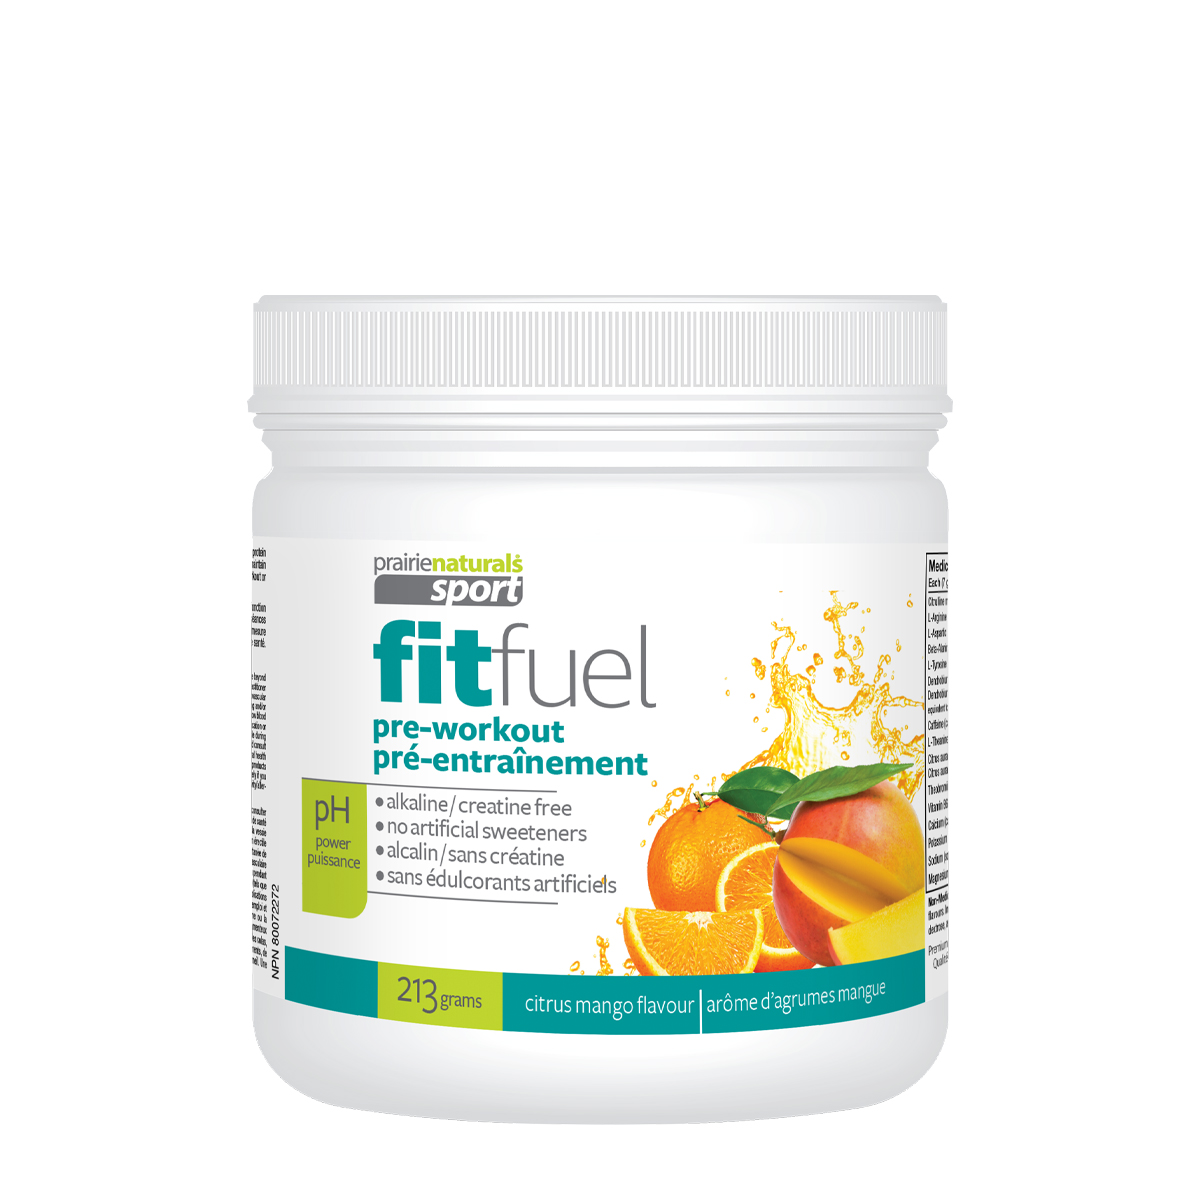 Featured image for “FitFuel”